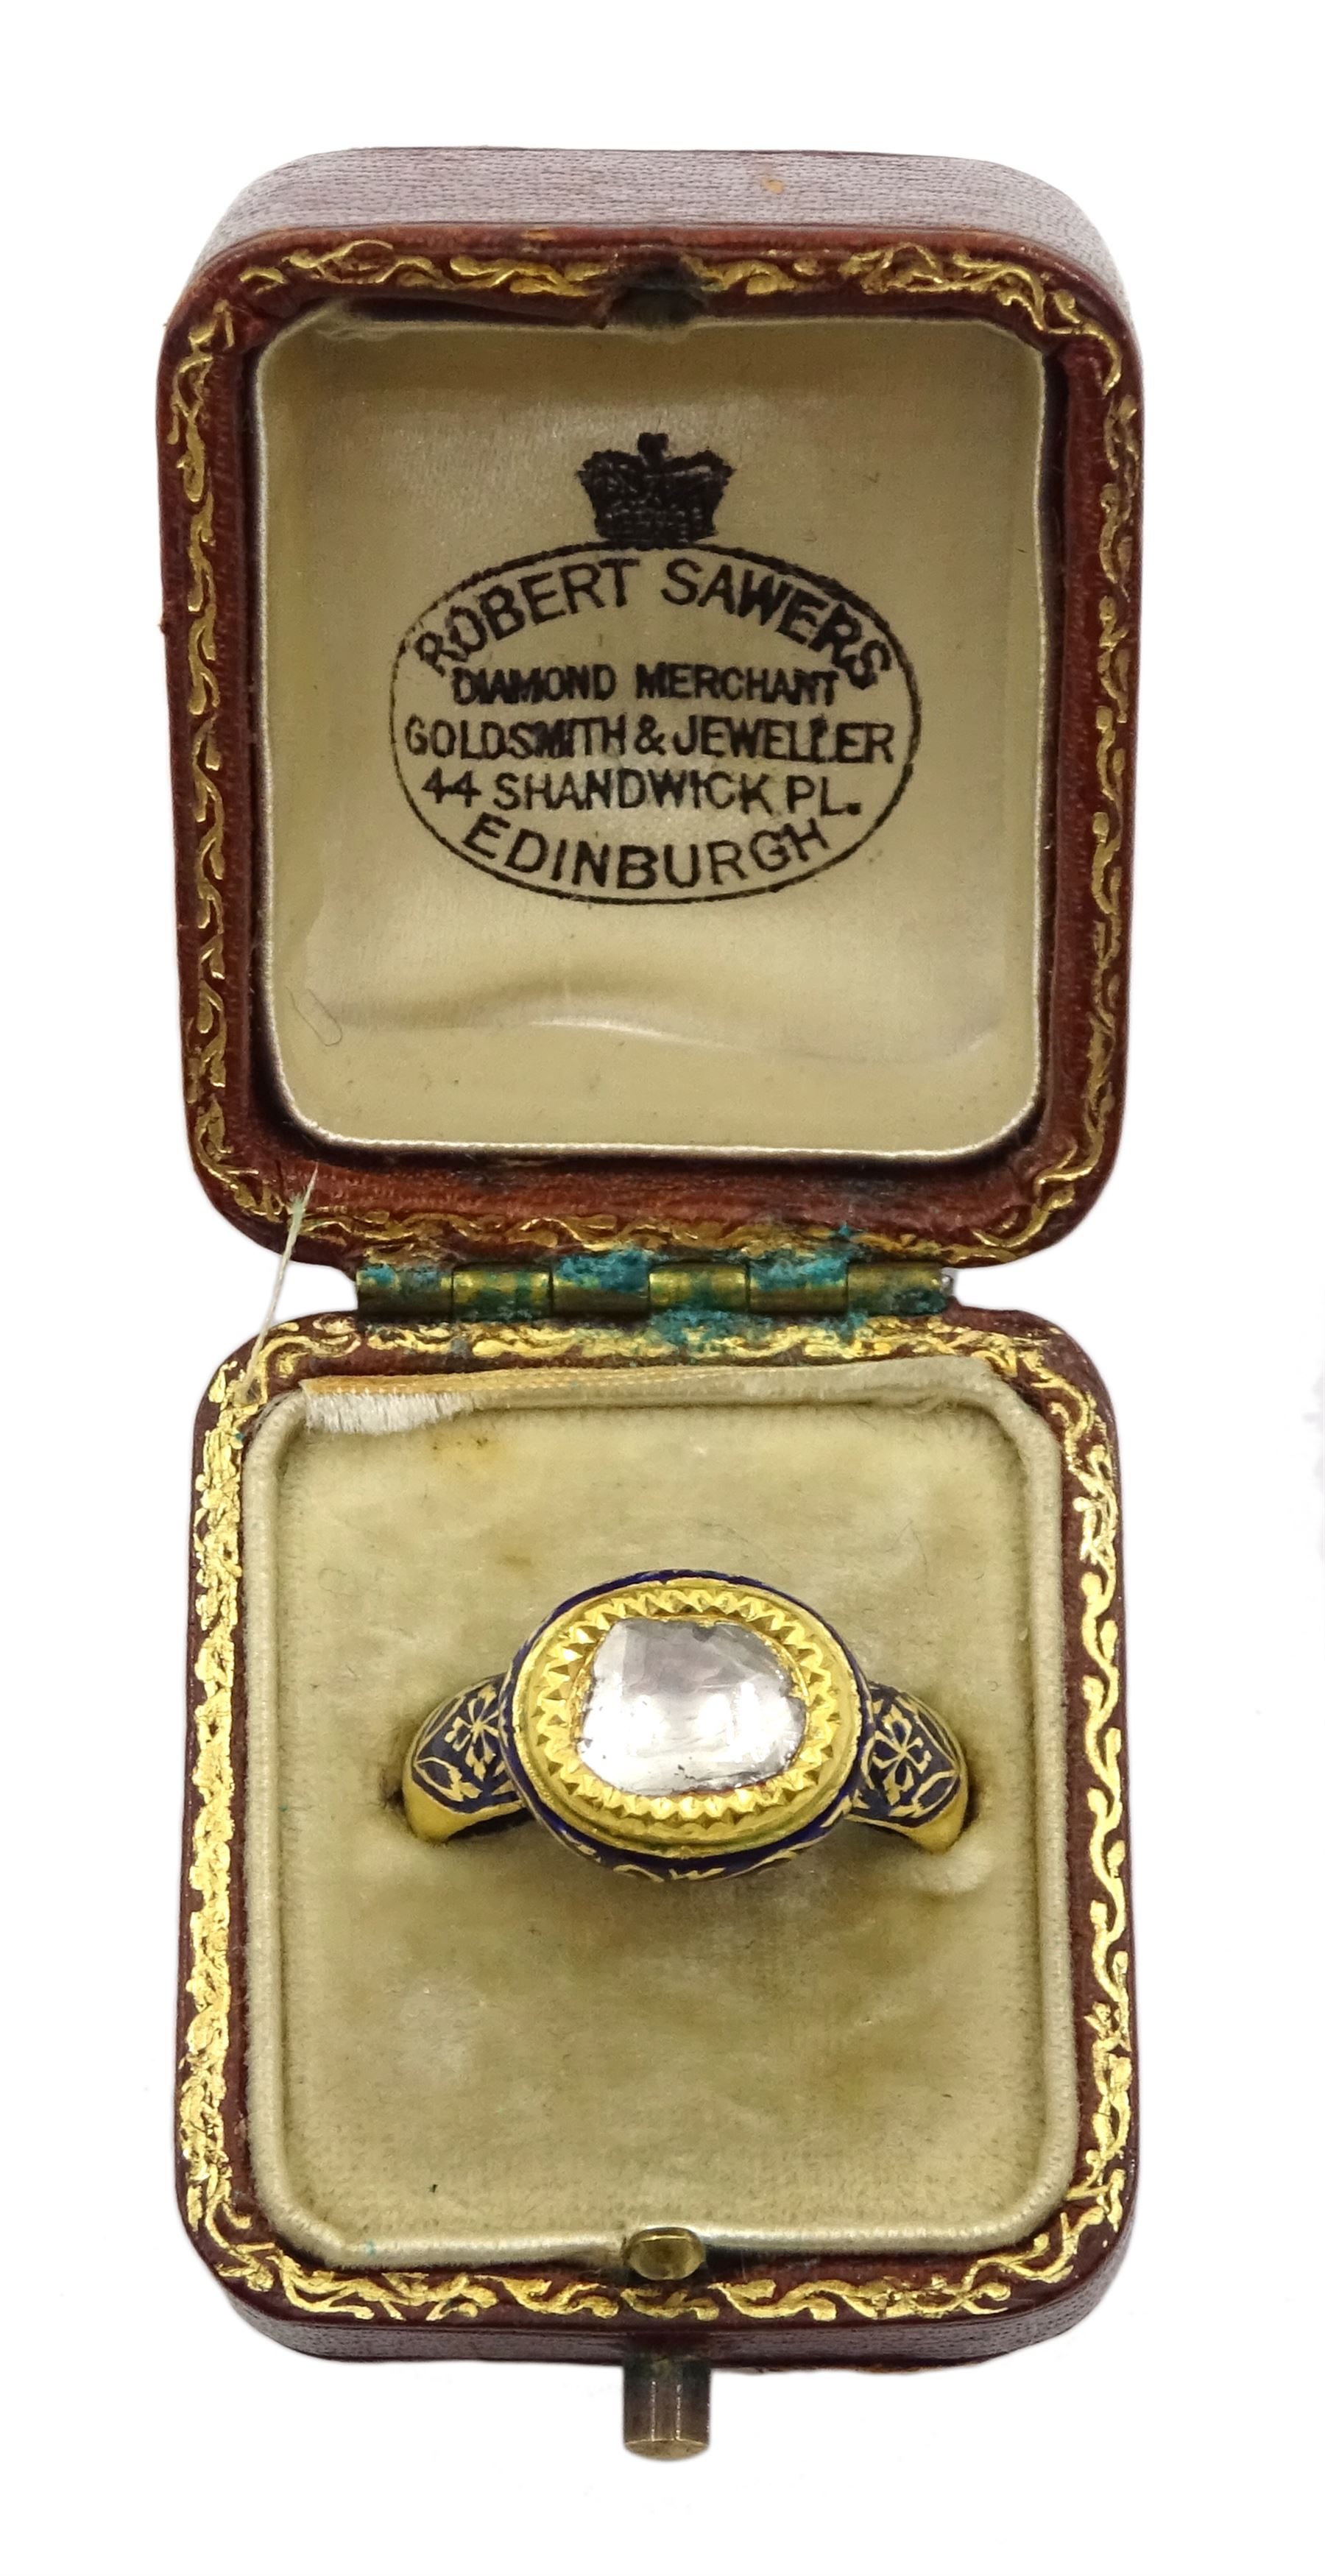 Late 19th/early 20th century gold Indian table cut diamond ring - Image 6 of 6